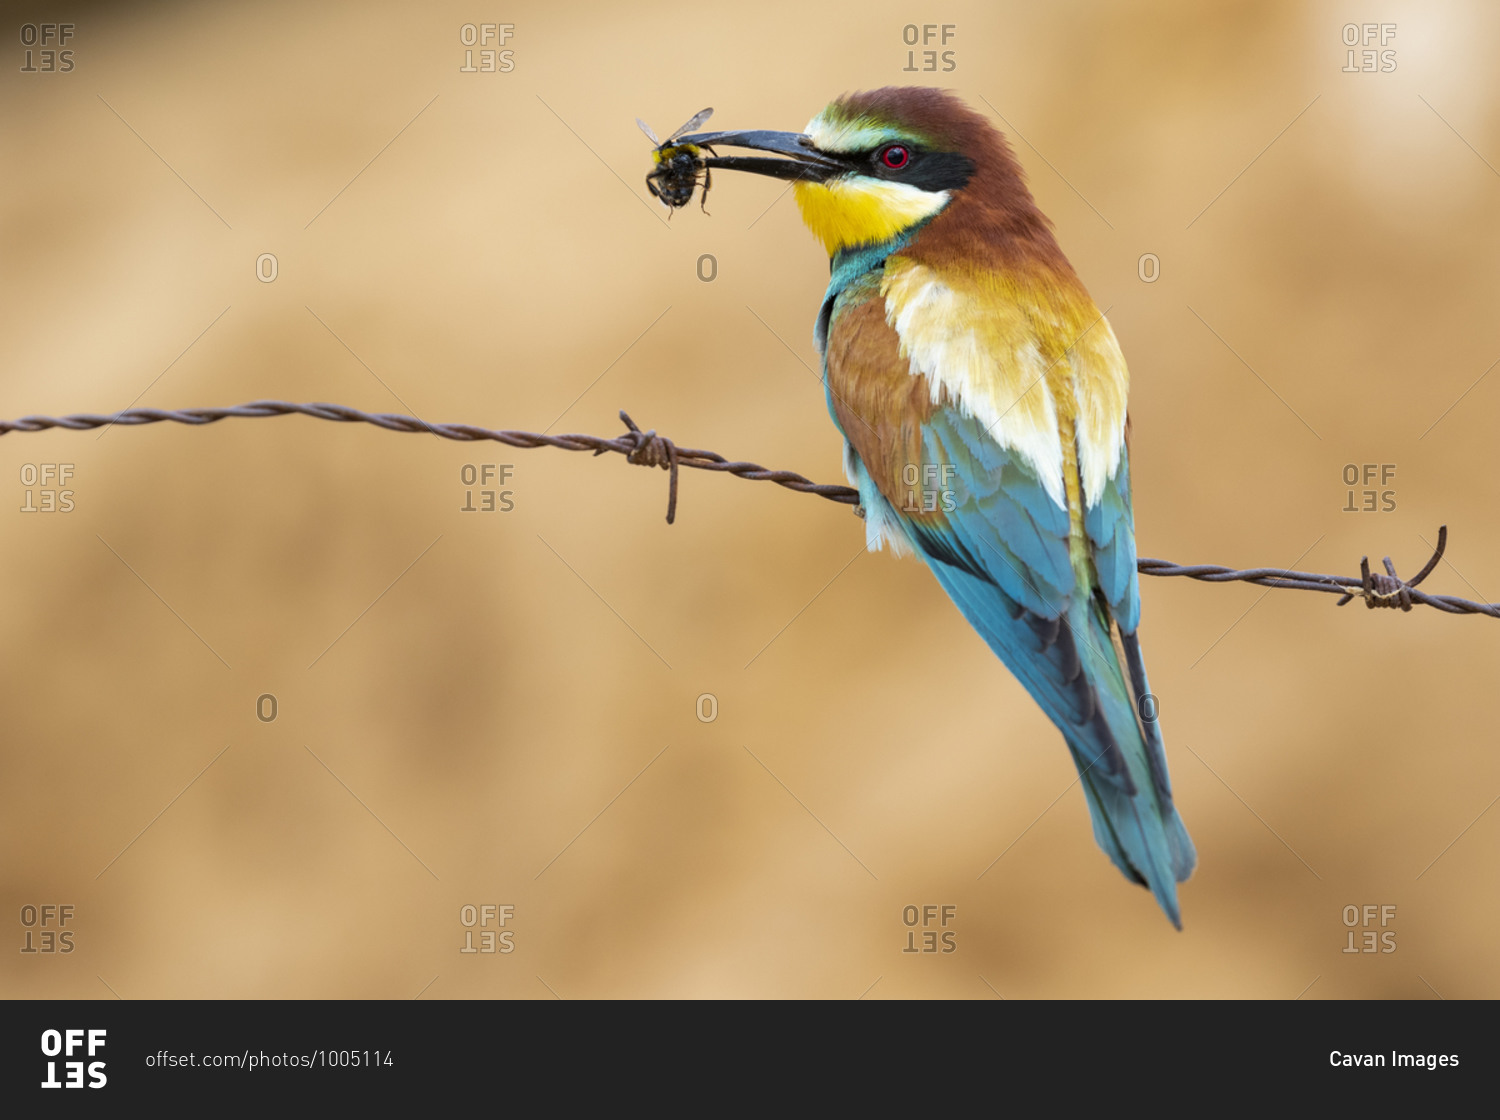 A European Bee Eater (Merops Apiaster) perched on a barbed wire with an insect in its beak. Horizontal shot on an unfocused ocher background.